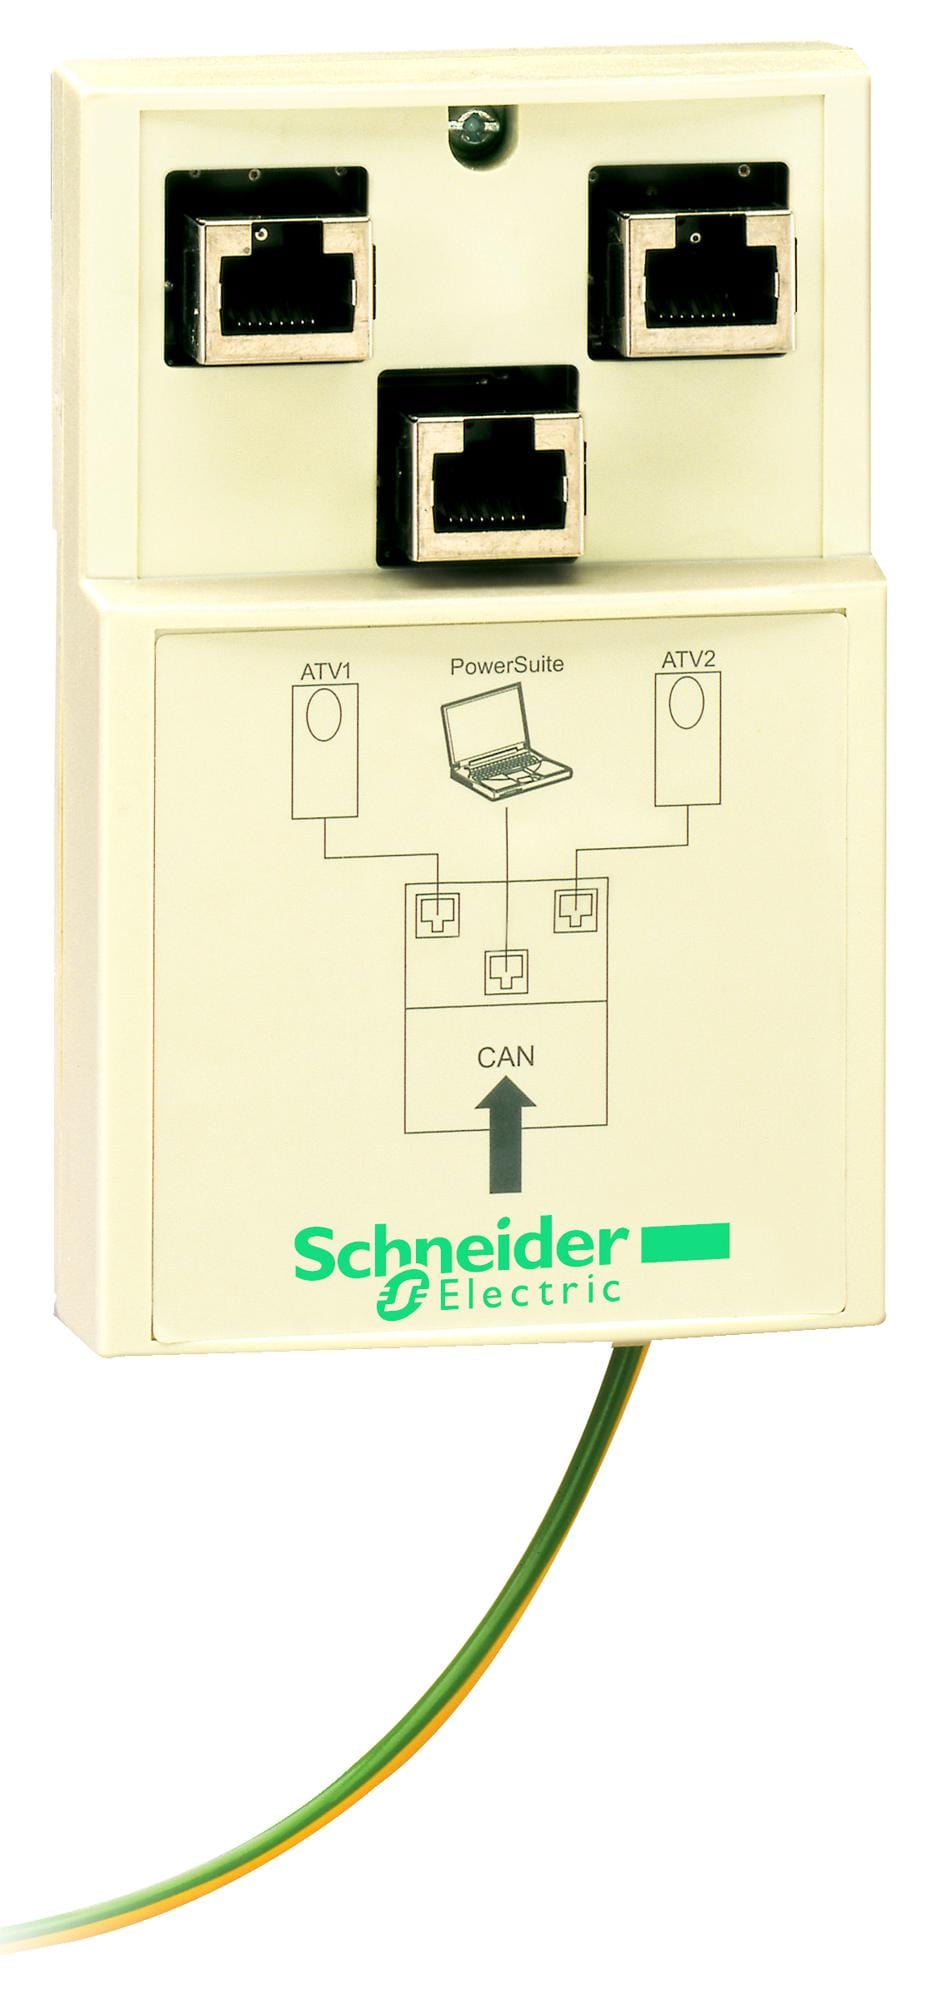 VW3CANTAP2 JUNCTION BOX, VARIABLE SPEED DRIVE SCHNEIDER ELECTRIC